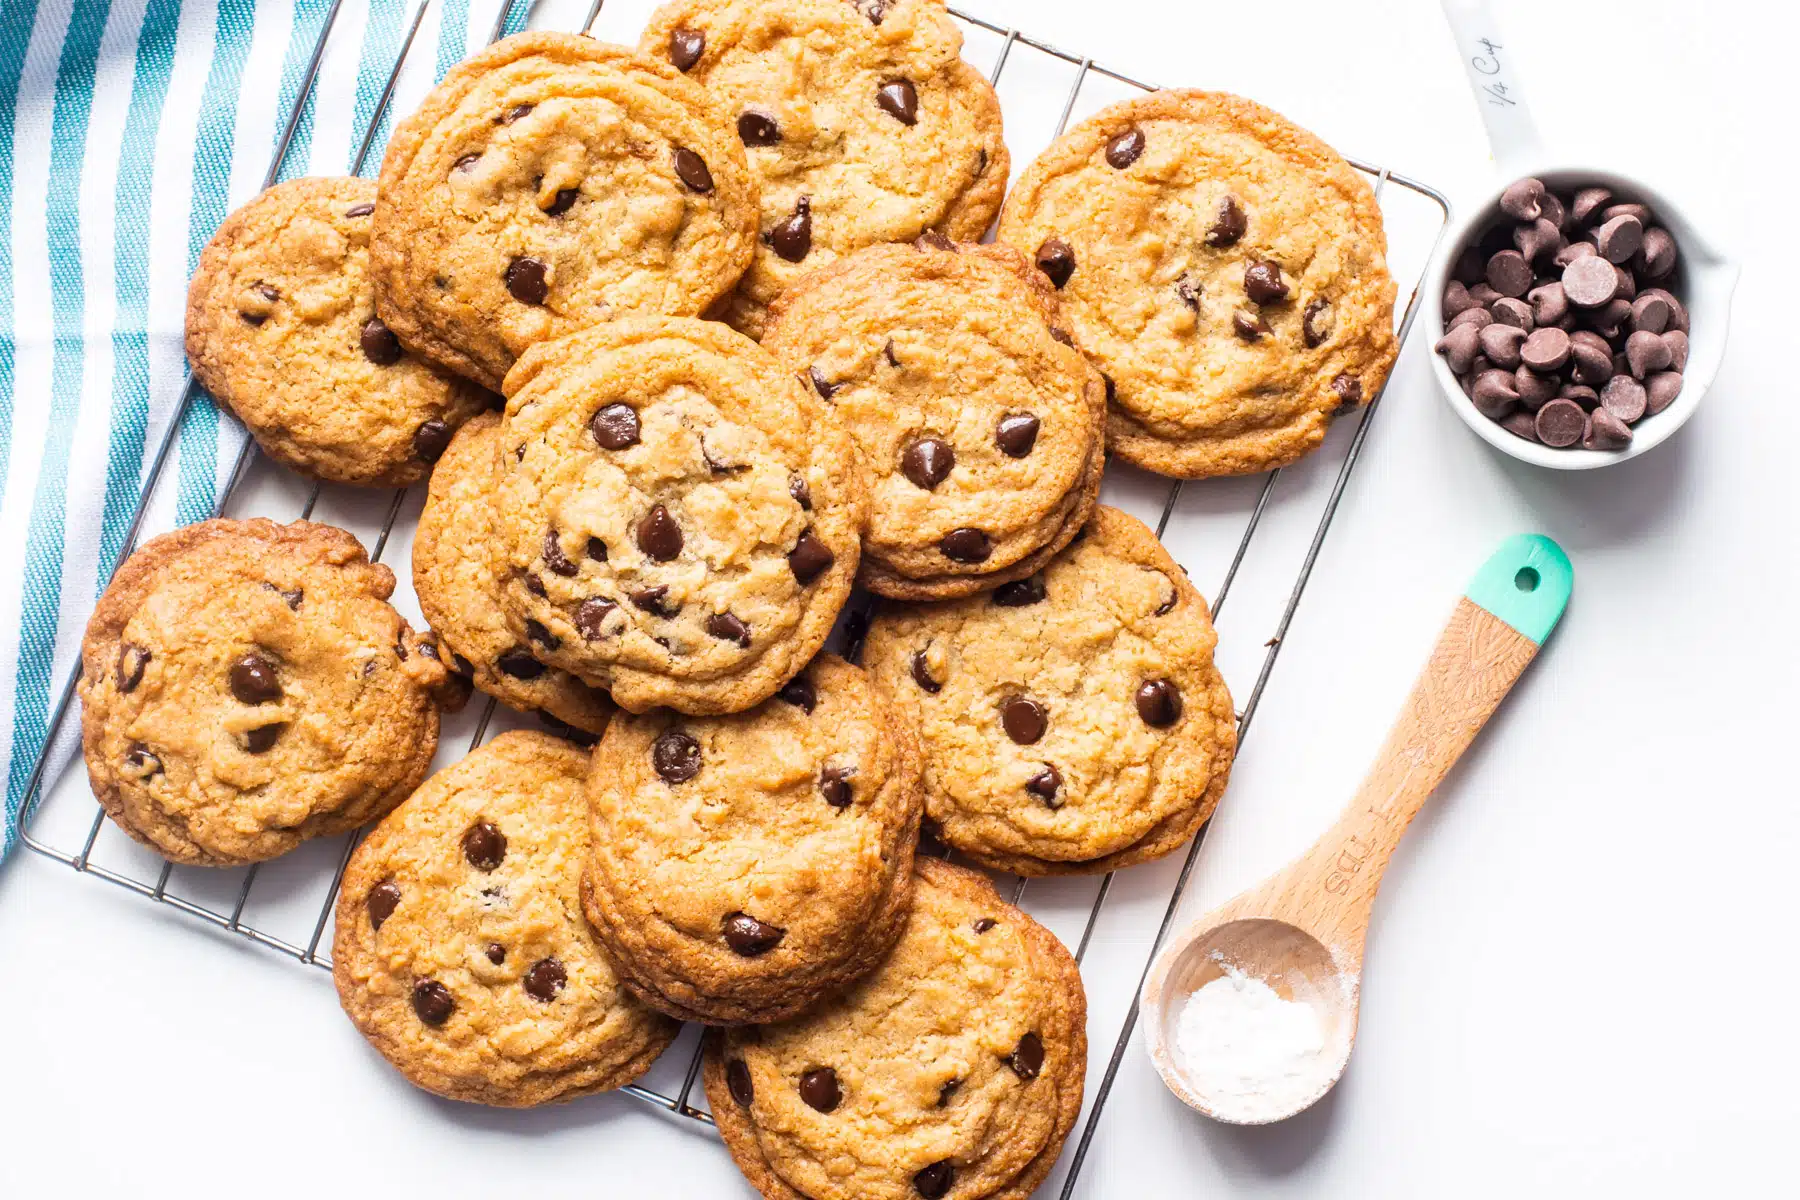 Freshly baked chocolate chip cookies are cooling on a wire rack. A cup of chocolate chips sits beside them along with a measuring spoon with baking soda in it.